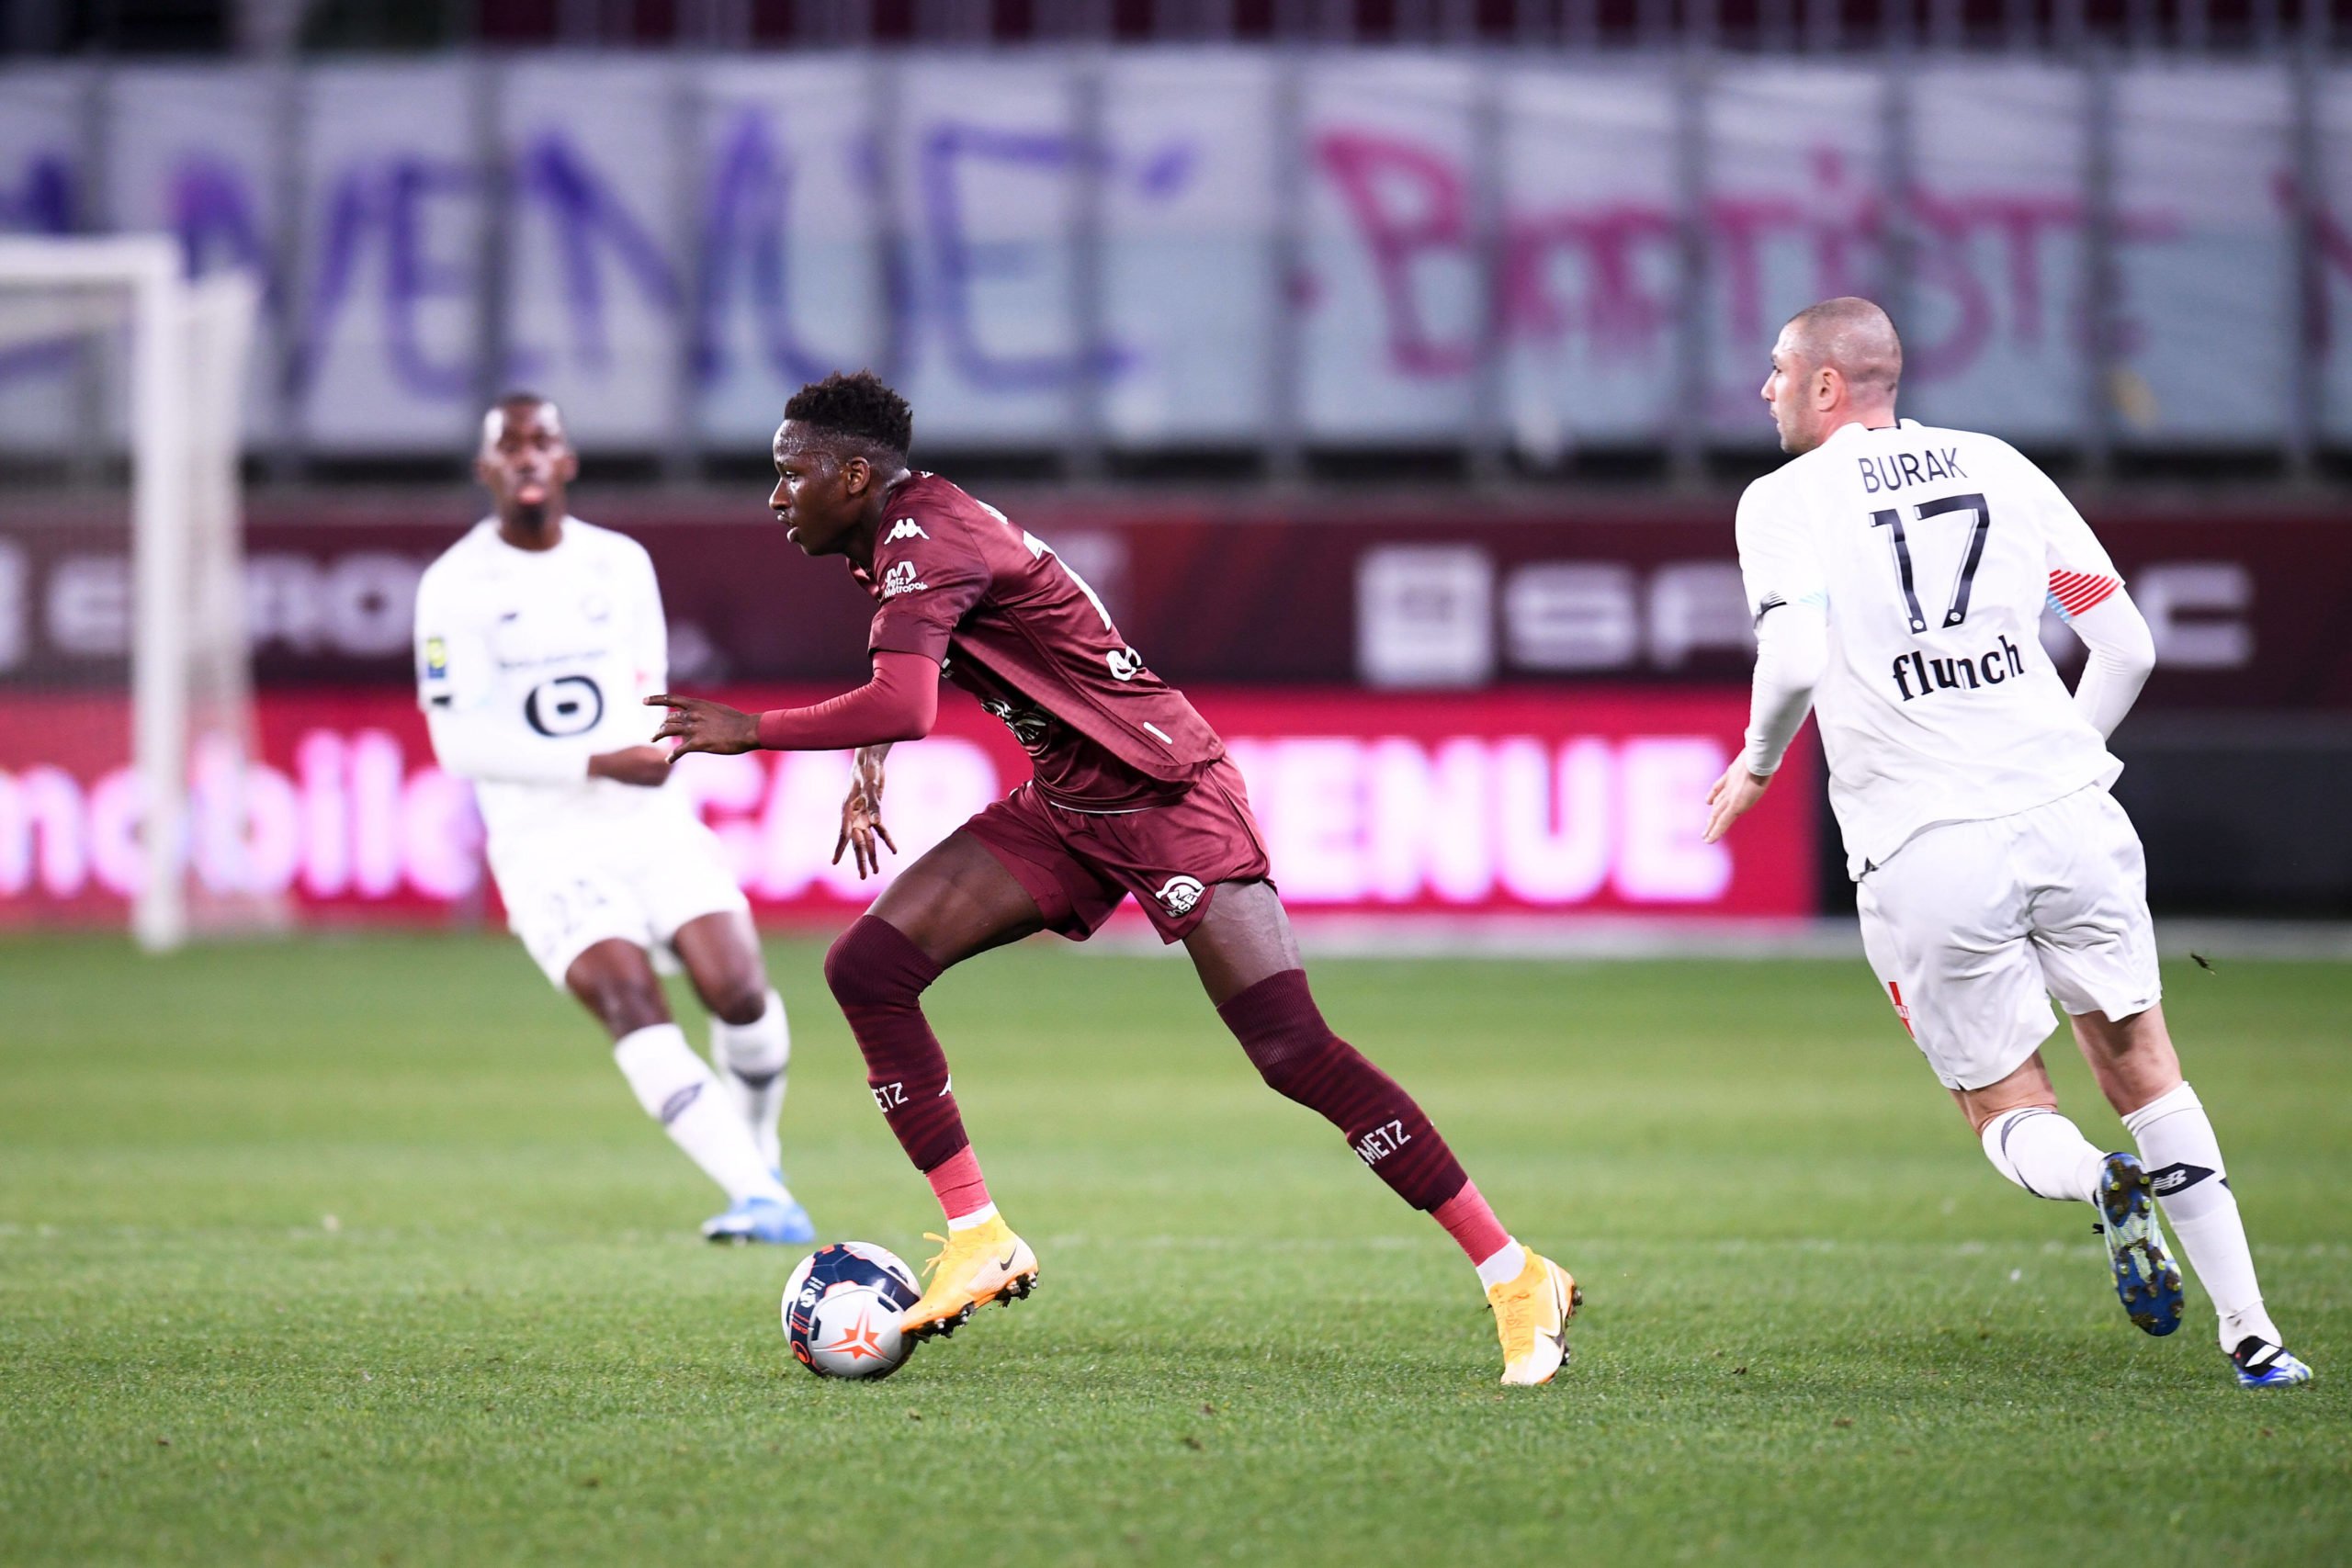 Manchester City are keeping tabs on Pape Sarr who is seen in the picture